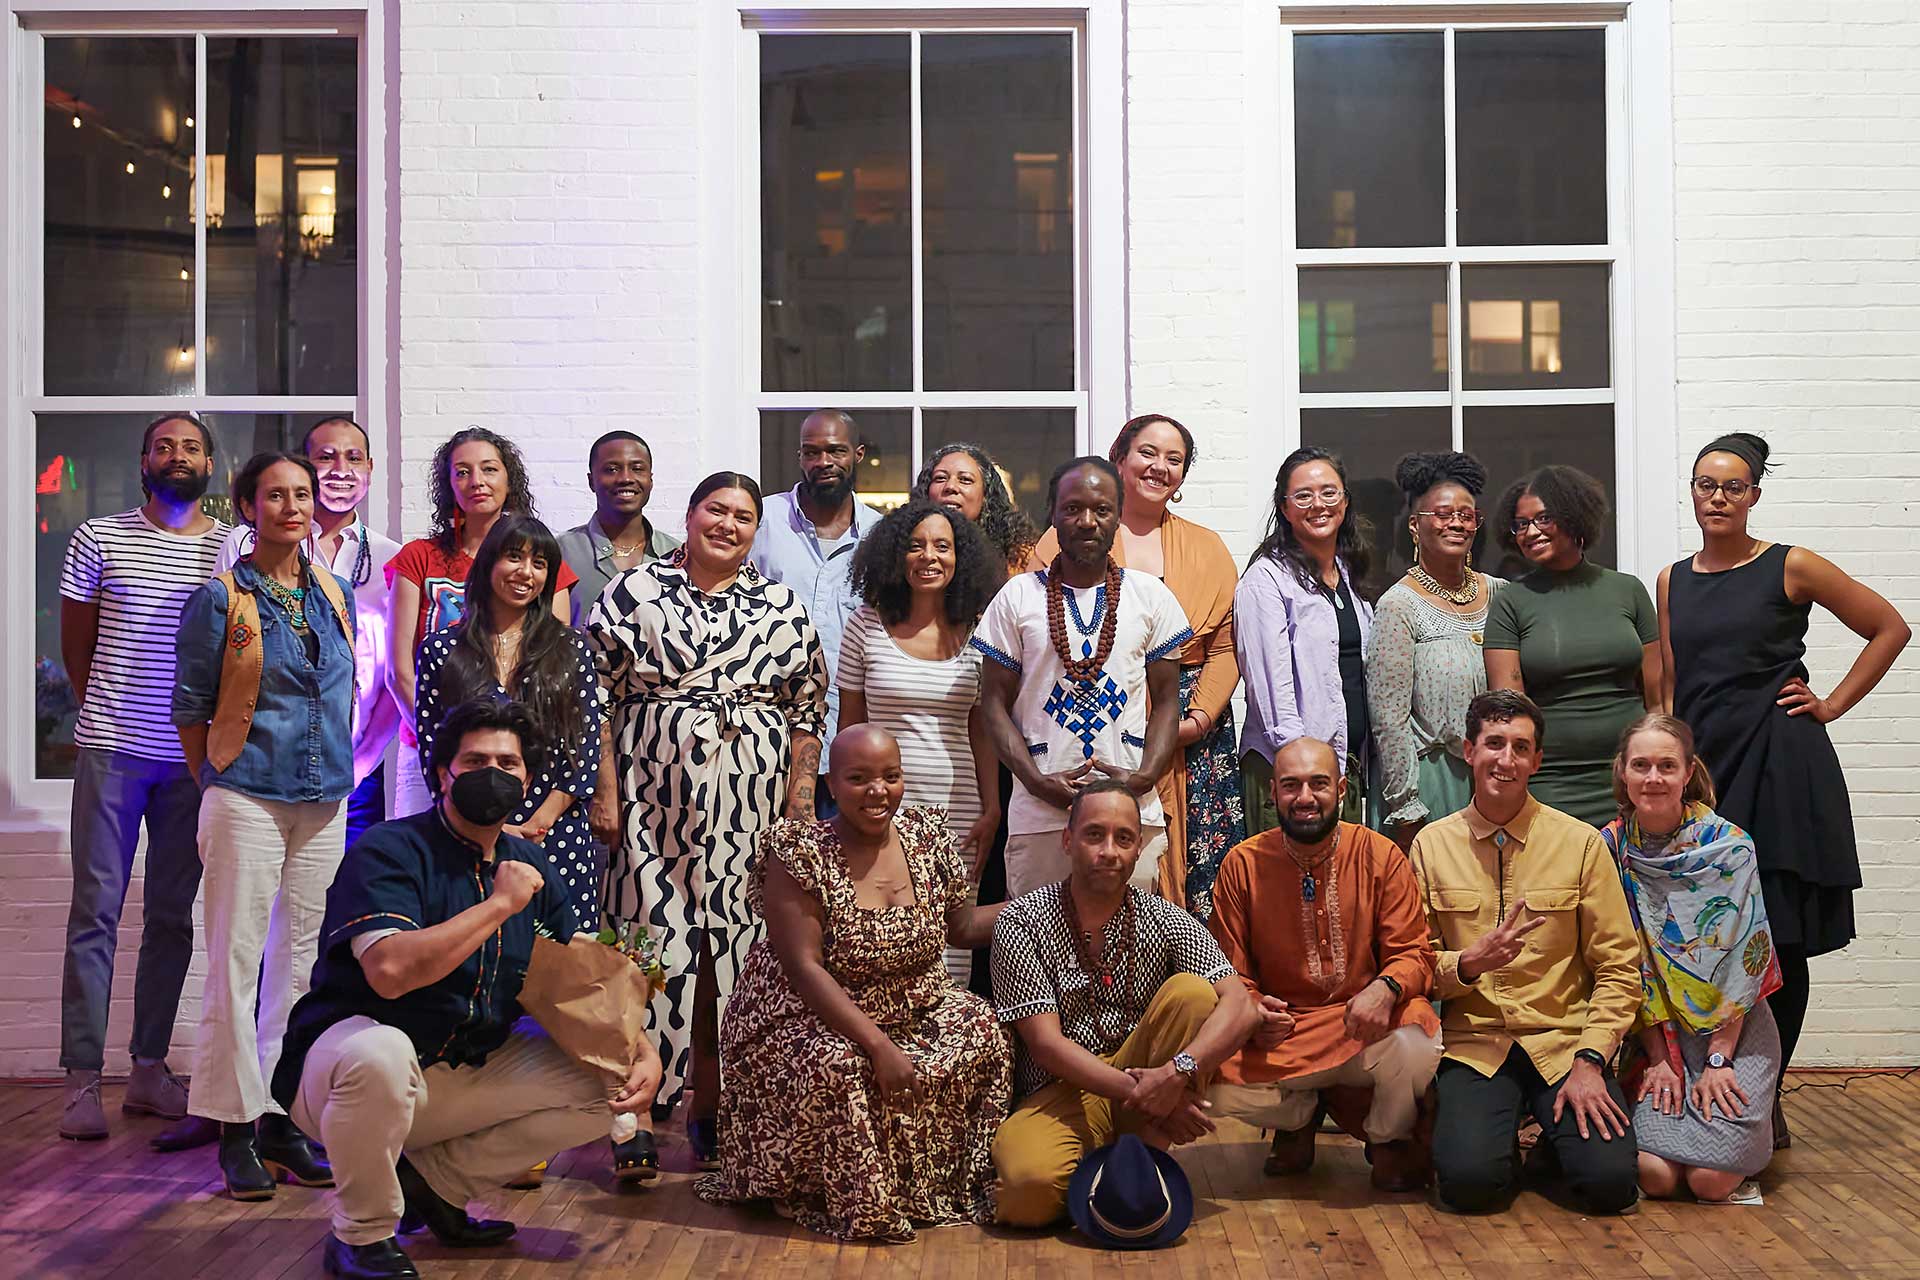 About two dozen mostly Black and Brown adults posing for a group photo, looking celebratory and joyful. They are in an indoor historic space with white brick walls and large windows.